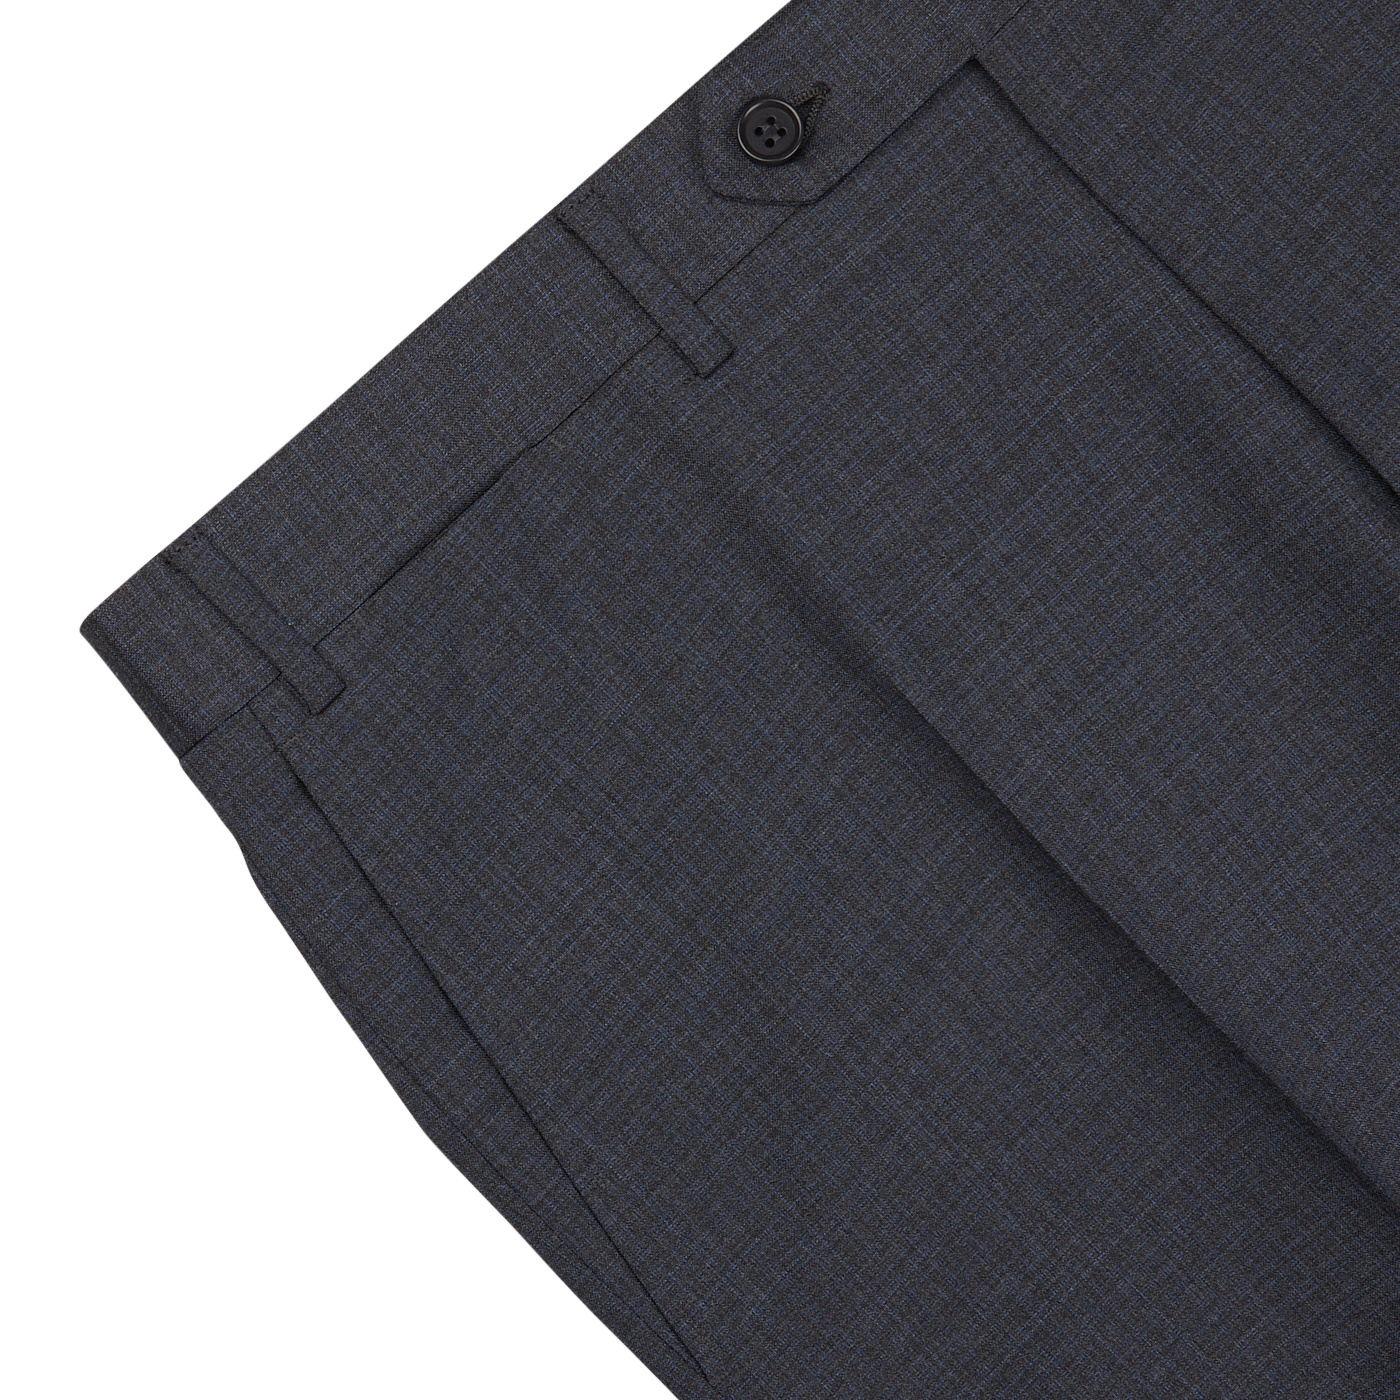 Close-up of a pair of grey-blue Canali suit pants with pockets, displaying a fine check pattern and a single button closure.